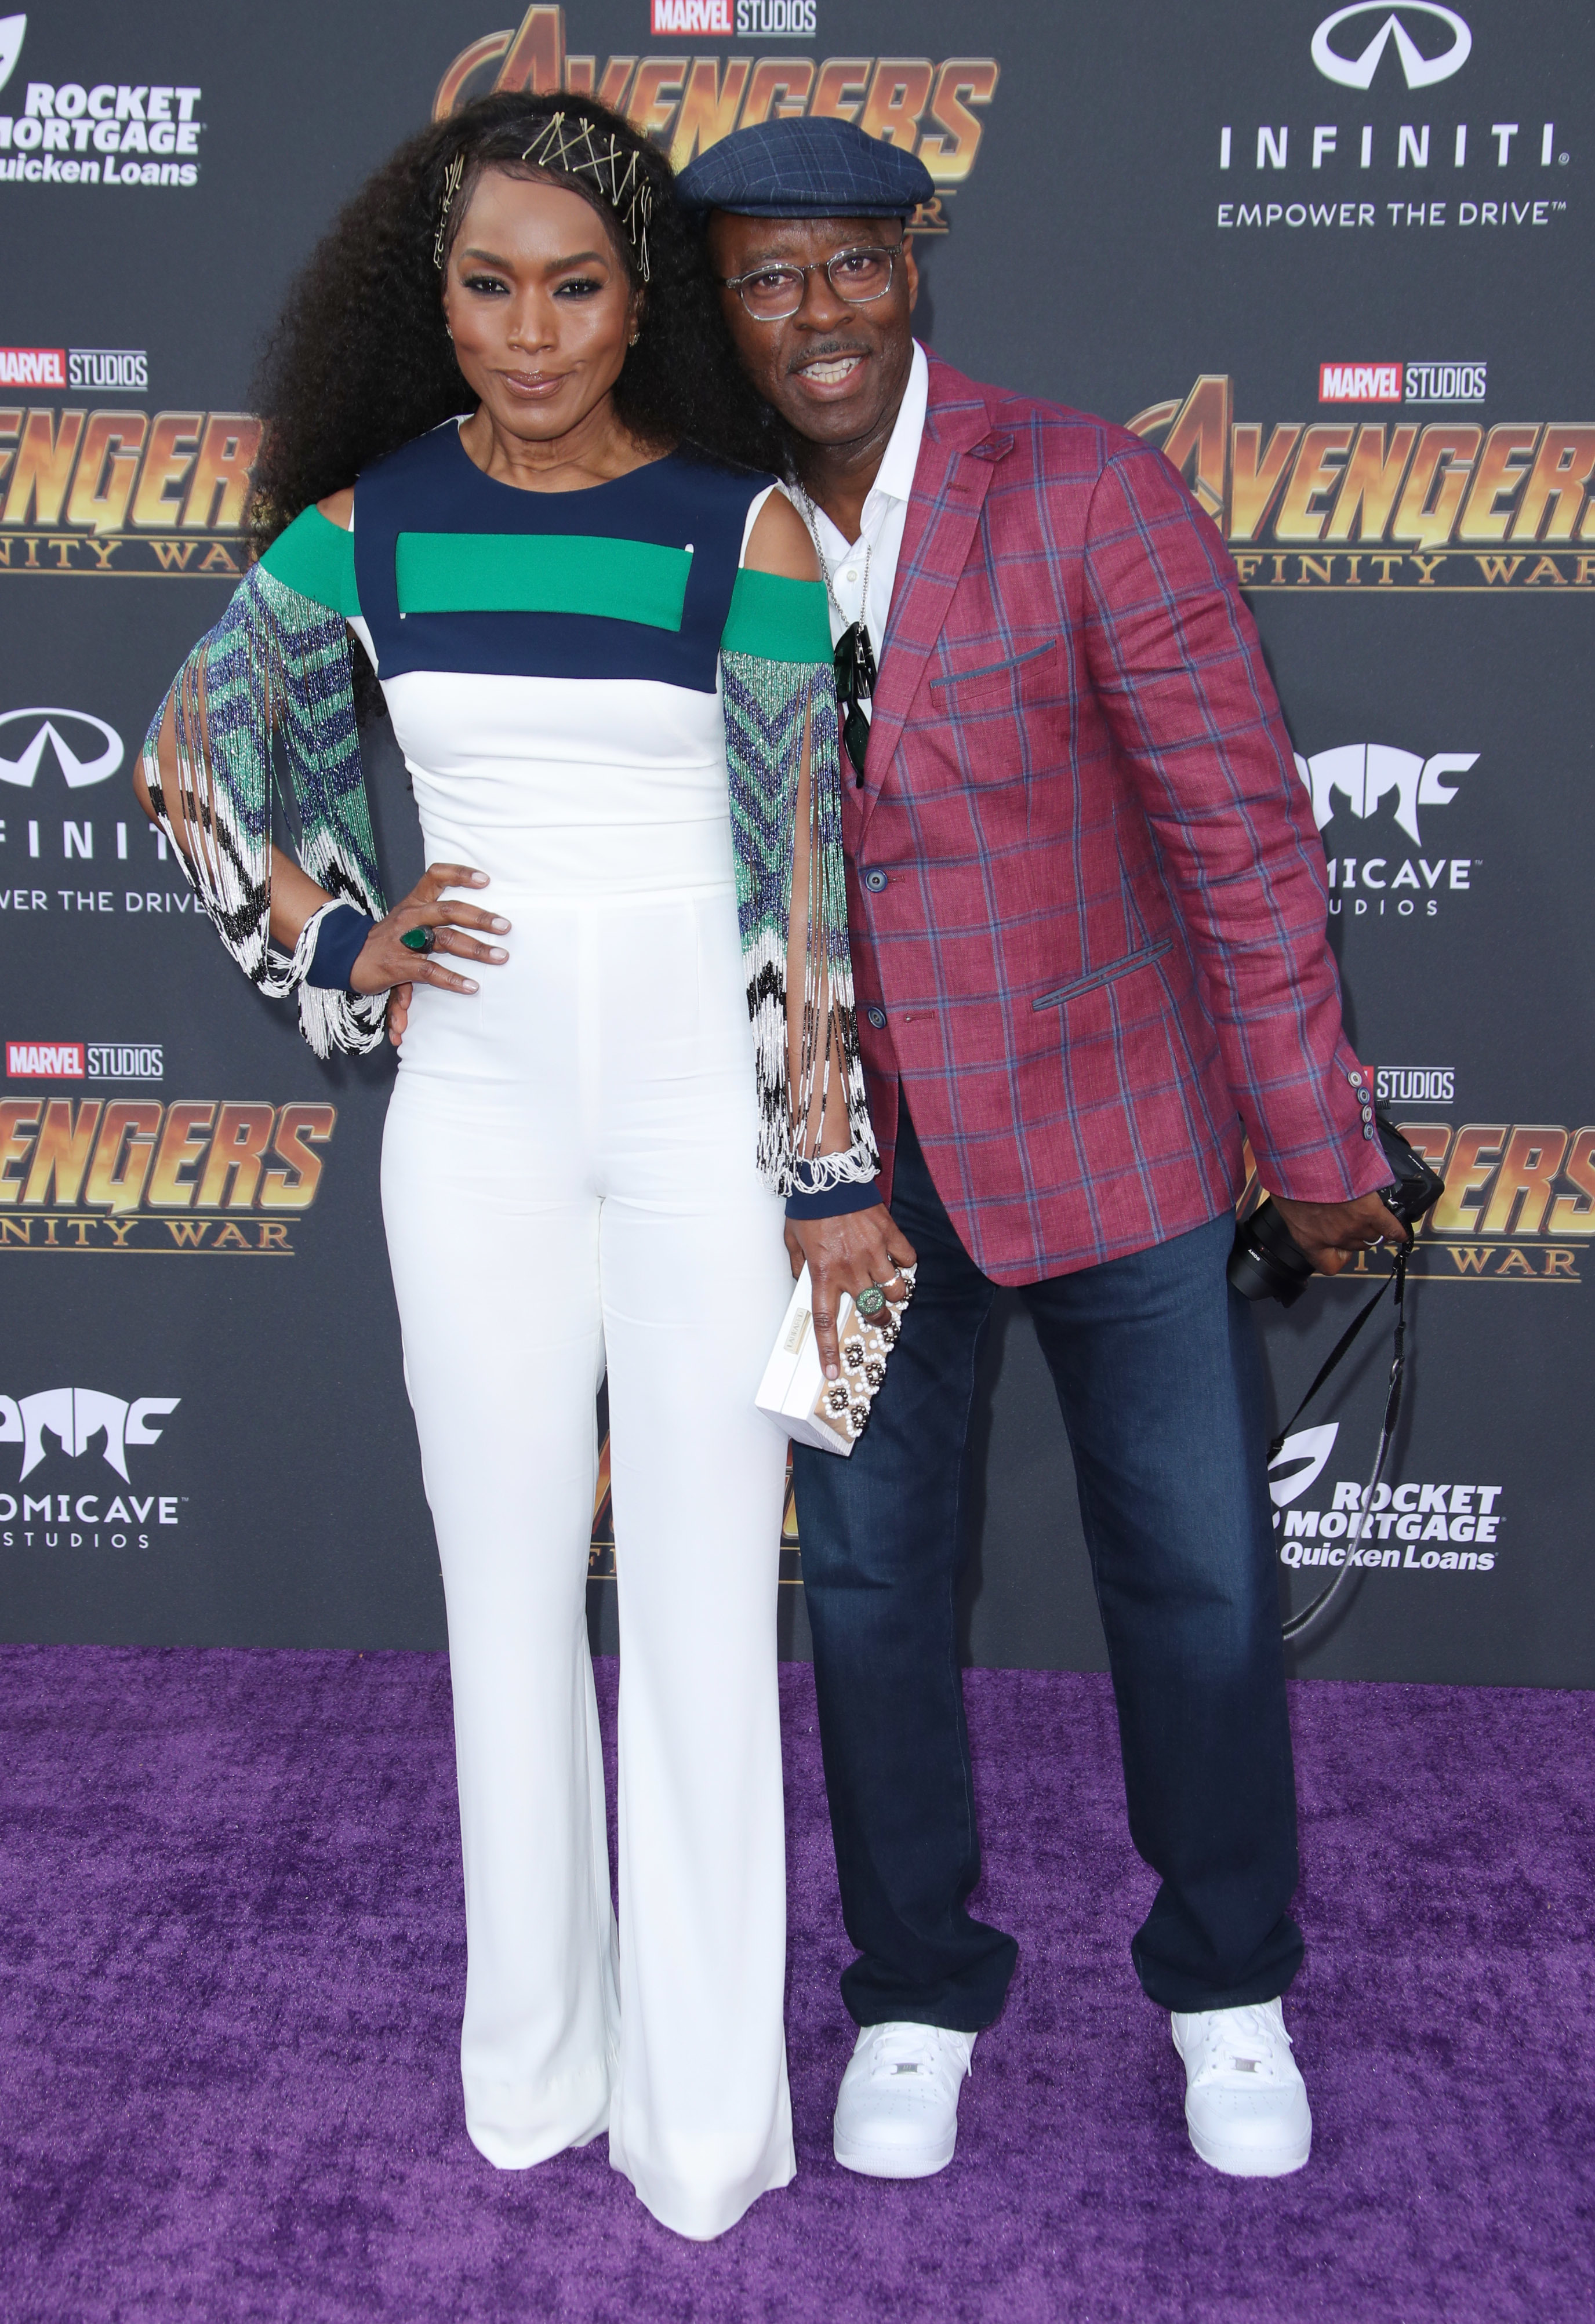 <p>Angela Bassett met her husband of more than 20 years, actor Courtney B. Vance, decades ago when they were in drama school. "He had a beautiful, beautiful girlfriend at the time, who was also in drama school with us," Angela told People TV's "The Jess Cagle Interview" in 2018. "So maybe about 14 years later, our paths crossed here in Los Angeles. And I was single, he was single. And I had such an appreciation for him over those years -- of his consistency, how he treated other people, of what a supporter he is, what a connector of people and ideas he is, how passionate he is." They married in 1997 and welcomed twins in 2006.</p>